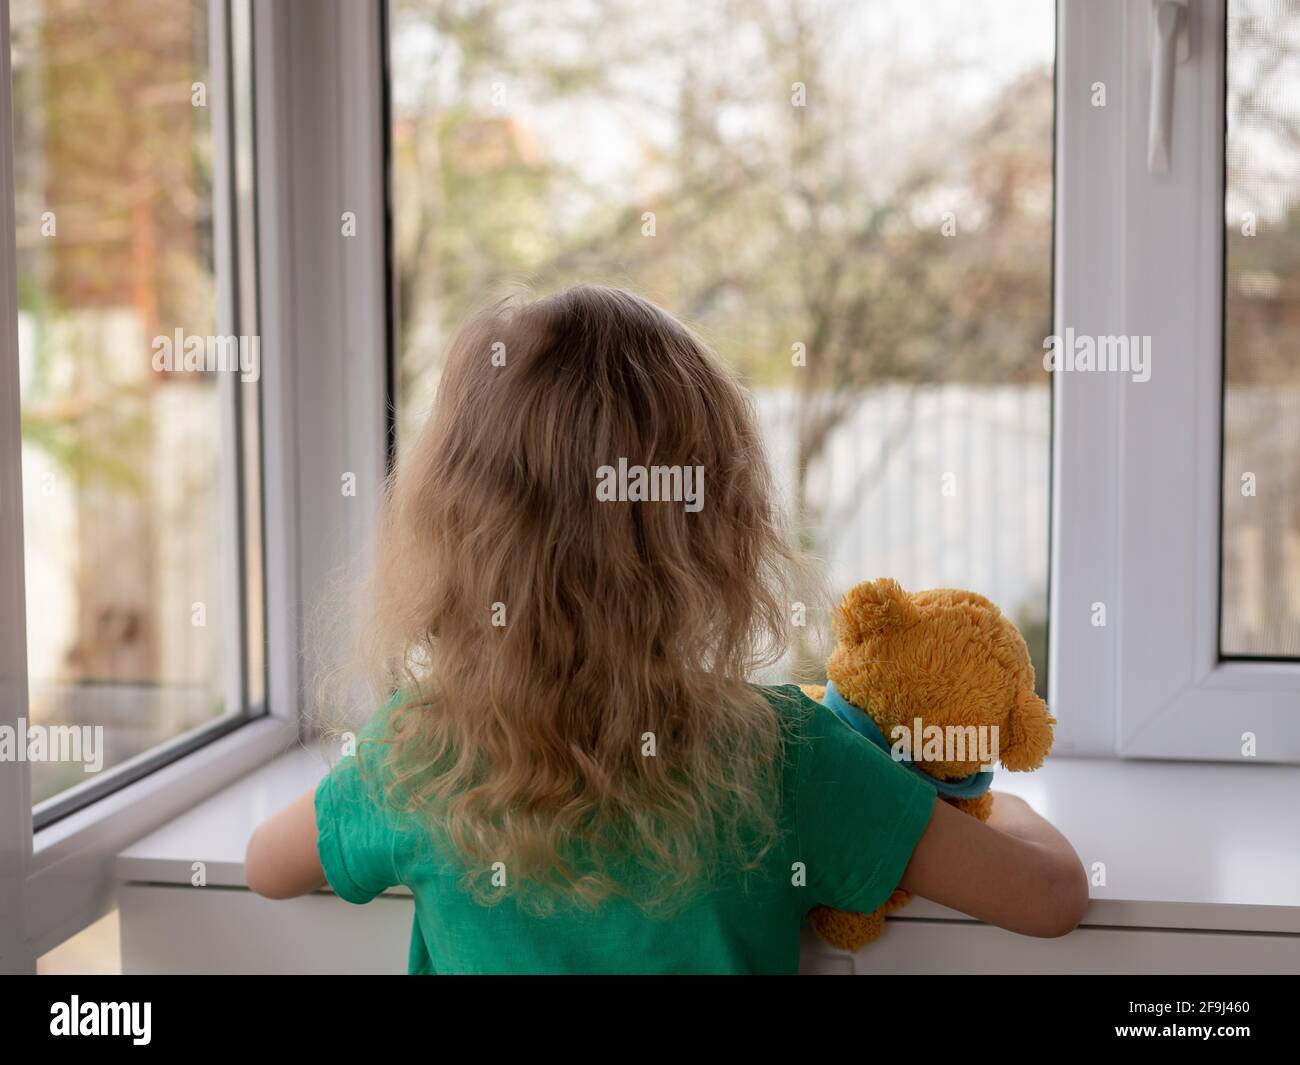 a little girl with her teddy bear looks out the window at the garden. stay home concept. selective focus Stock Photo